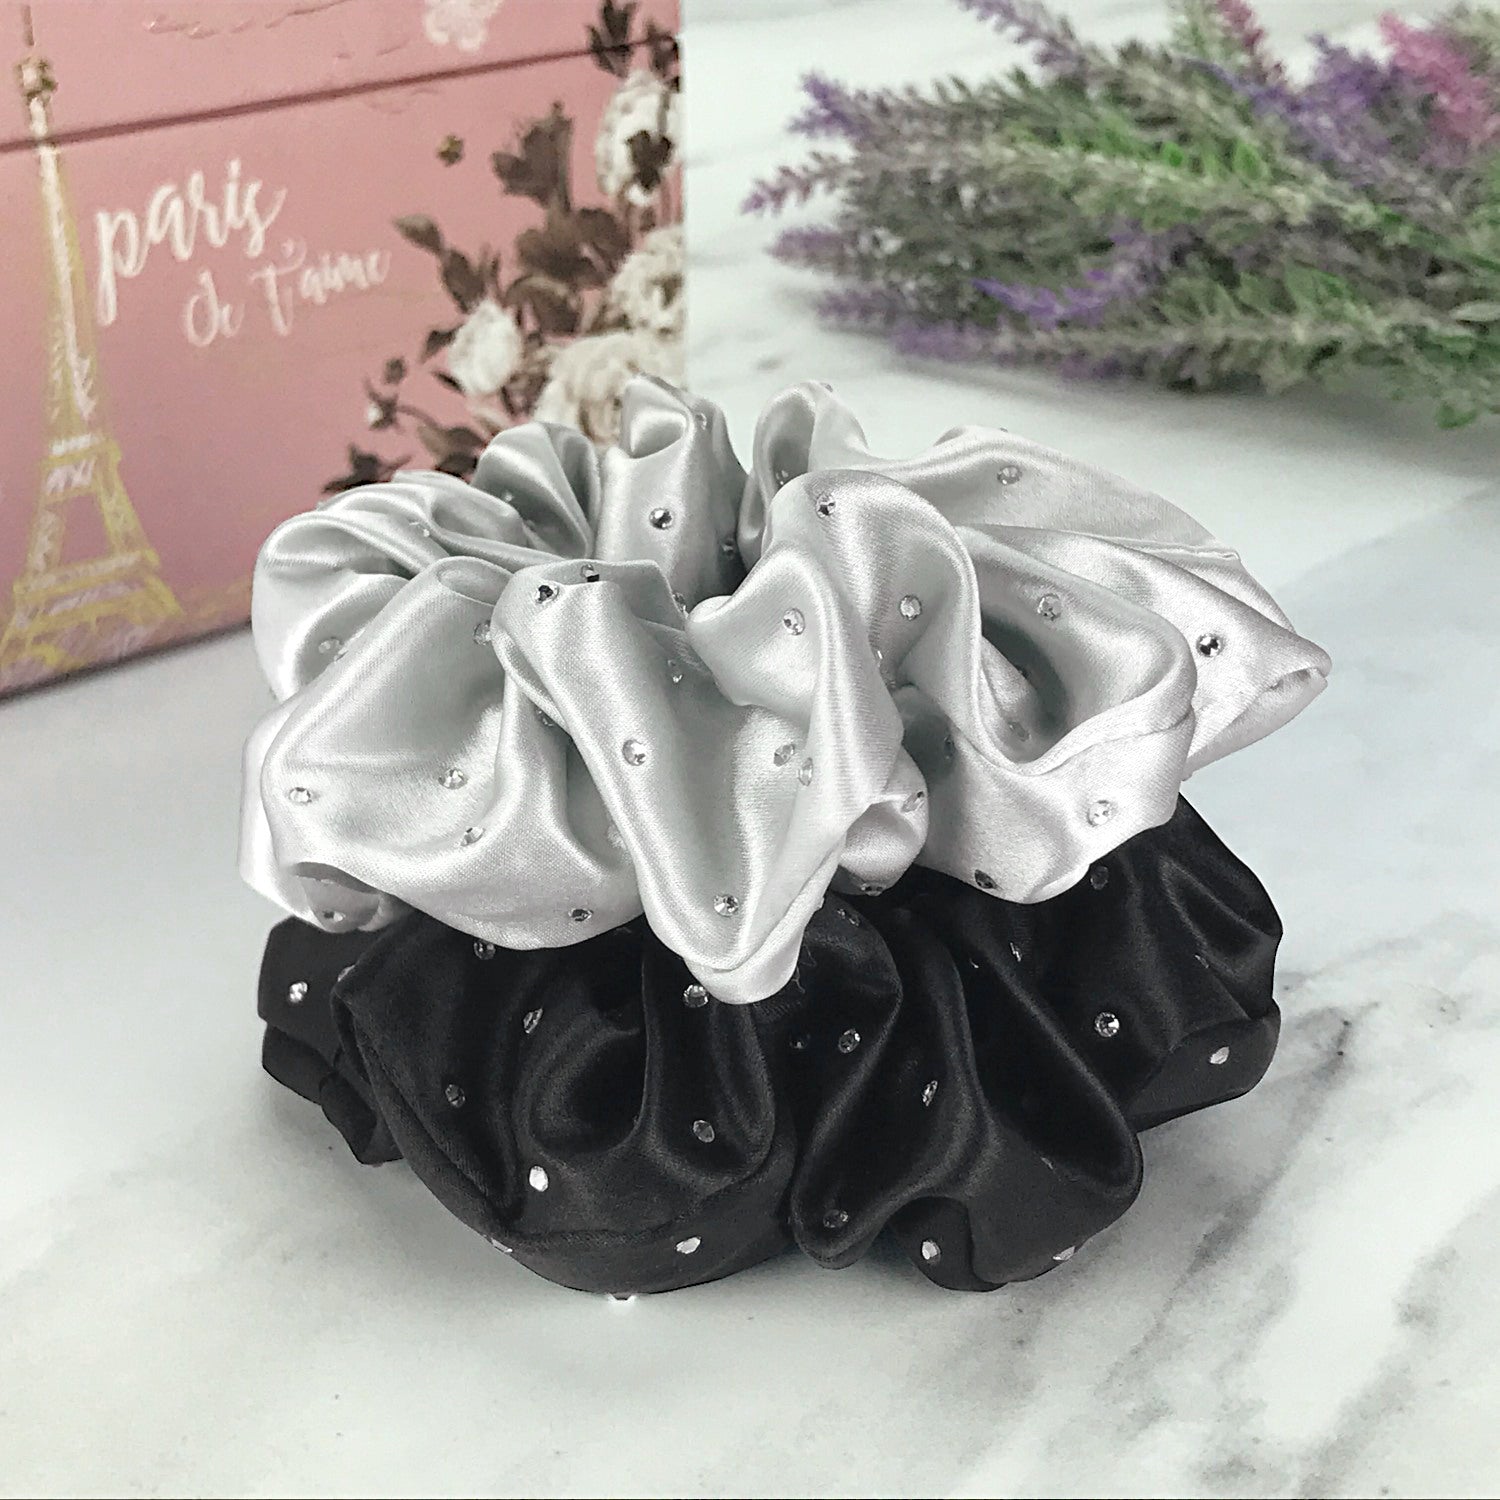 Celestial Silk scrunchies with crystals, silk hair ties with rhinestones black and silver silk hair scrunchies on marble surface with lavender and pink jewelry box